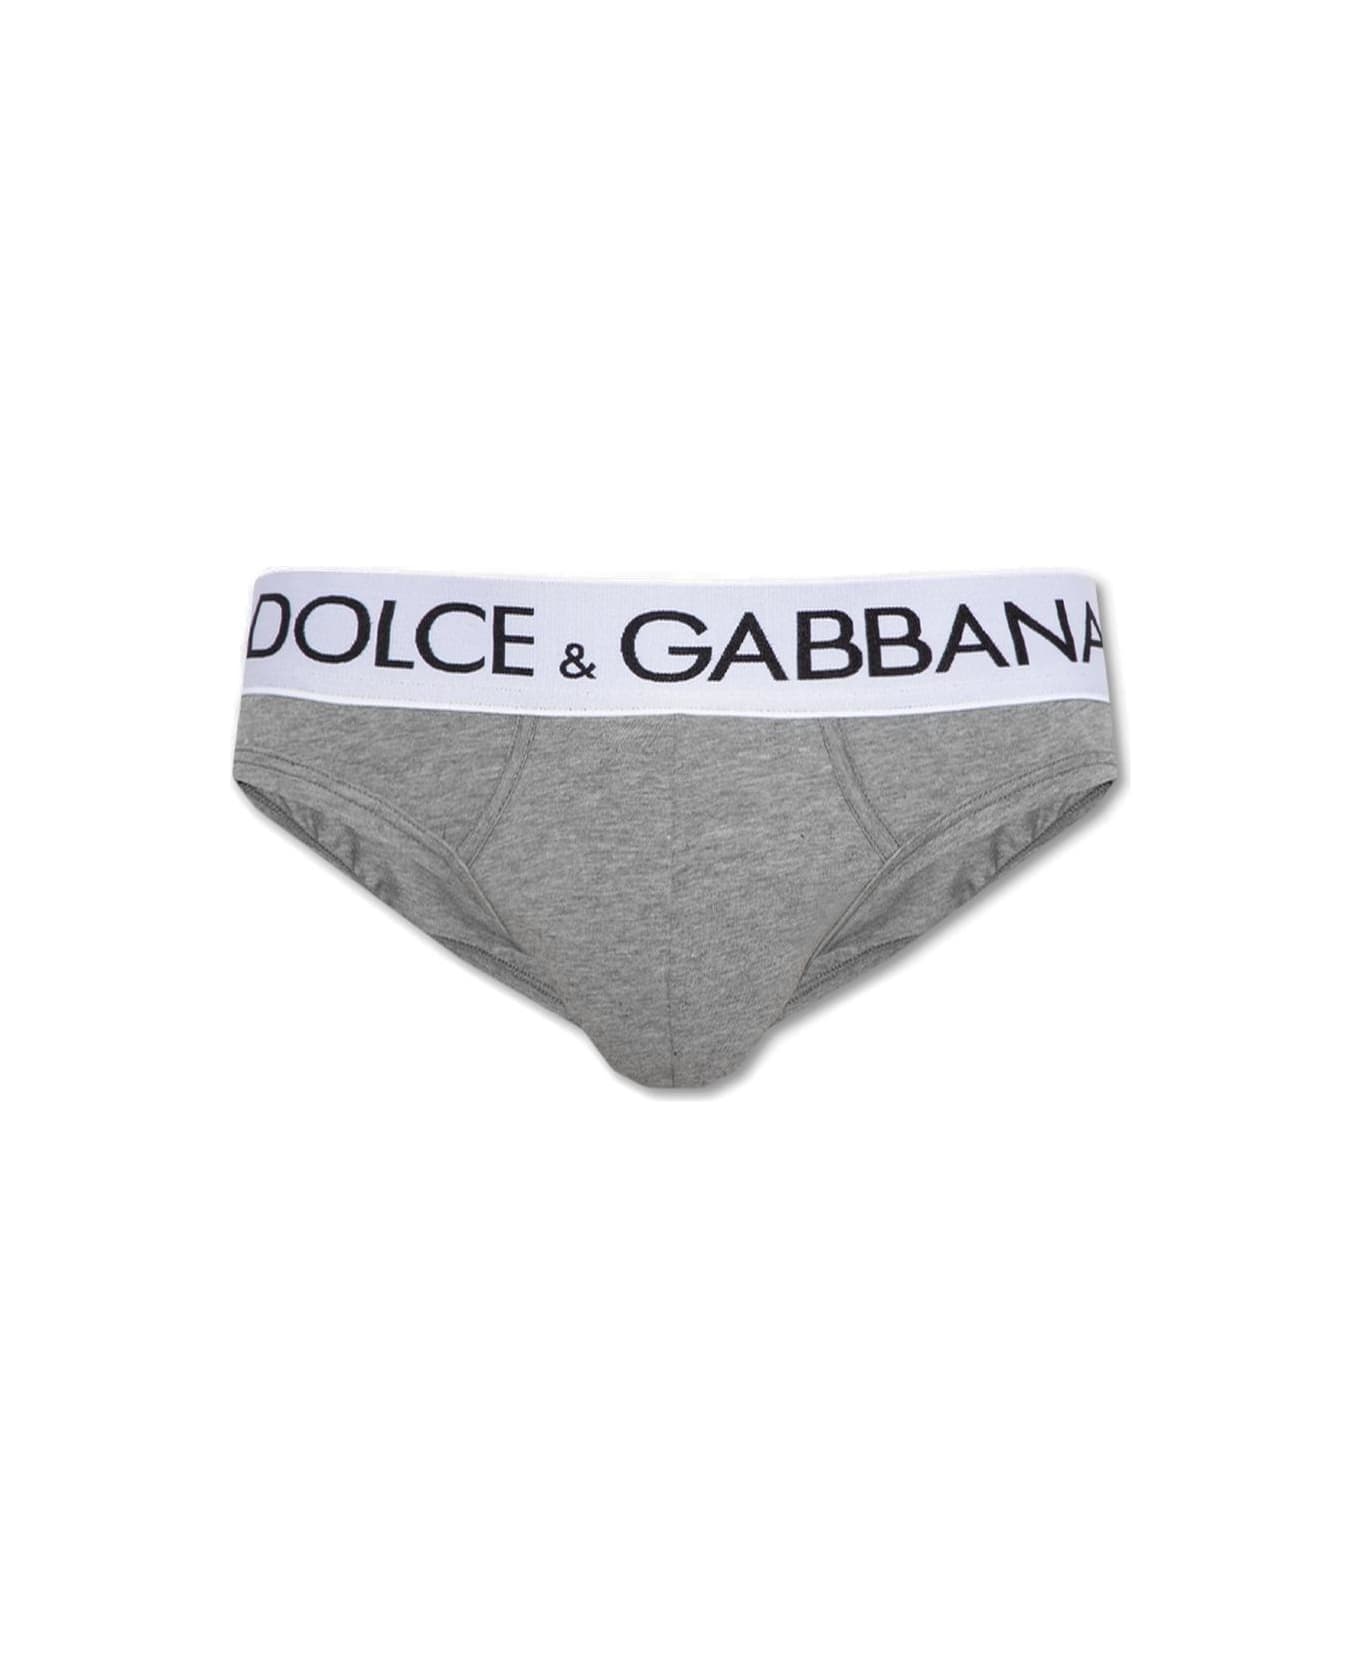 Dolce & Gabbana Two Way Stretched Mid-rise Briefs - MELANGE GREY ショーツ